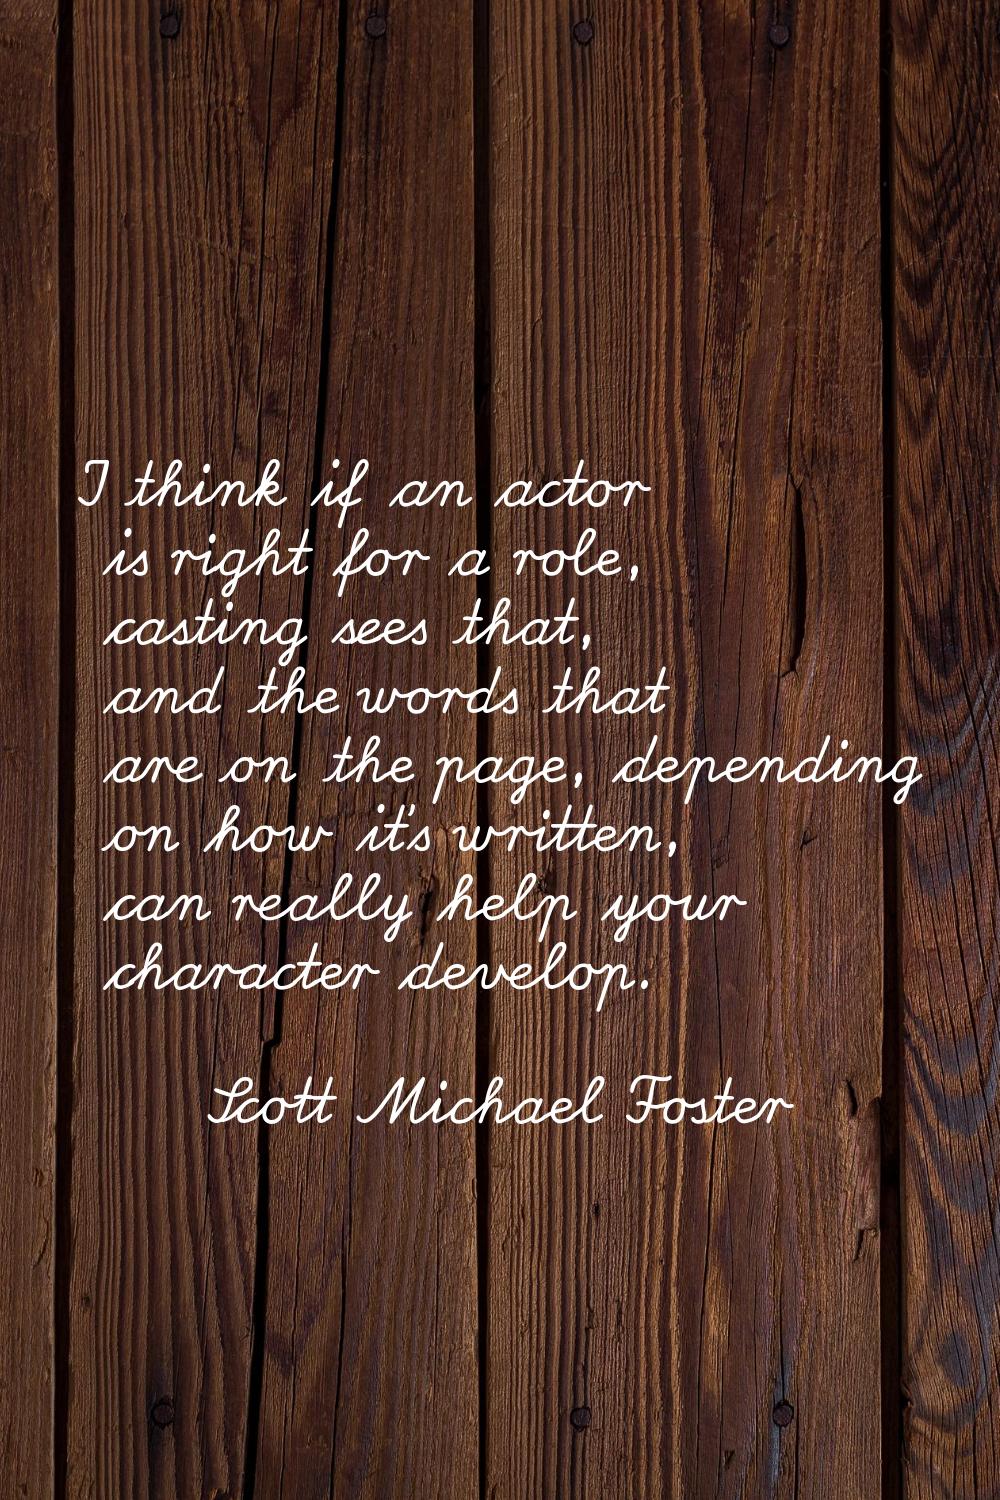 I think if an actor is right for a role, casting sees that, and the words that are on the page, dep